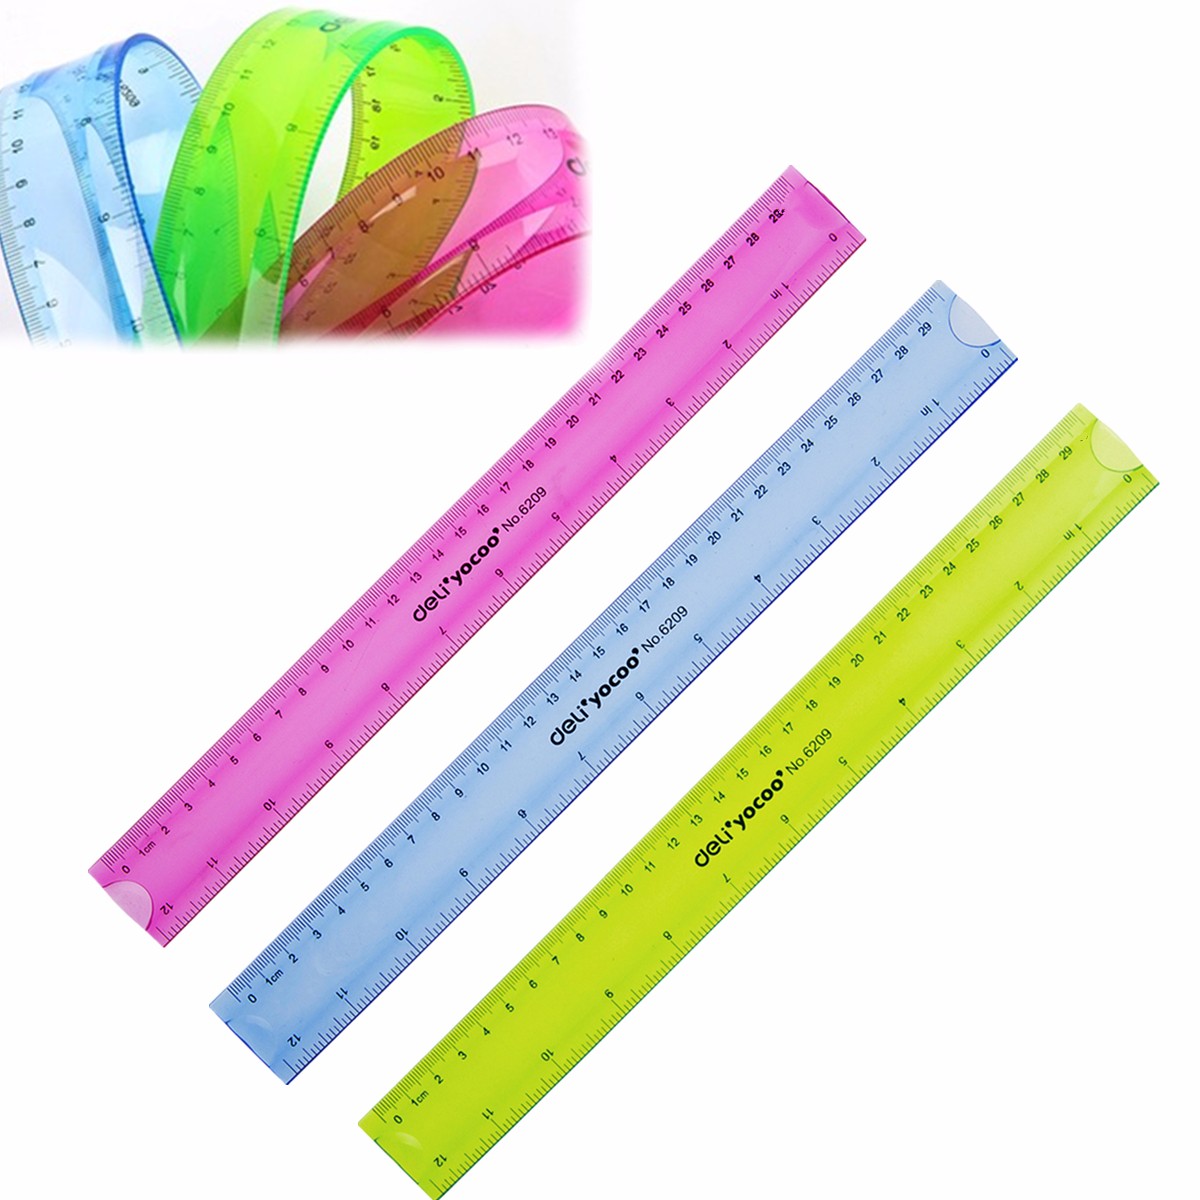 

12" 30cm Super Flexible Ruler Rule Measuring Tool Stationery for Office School